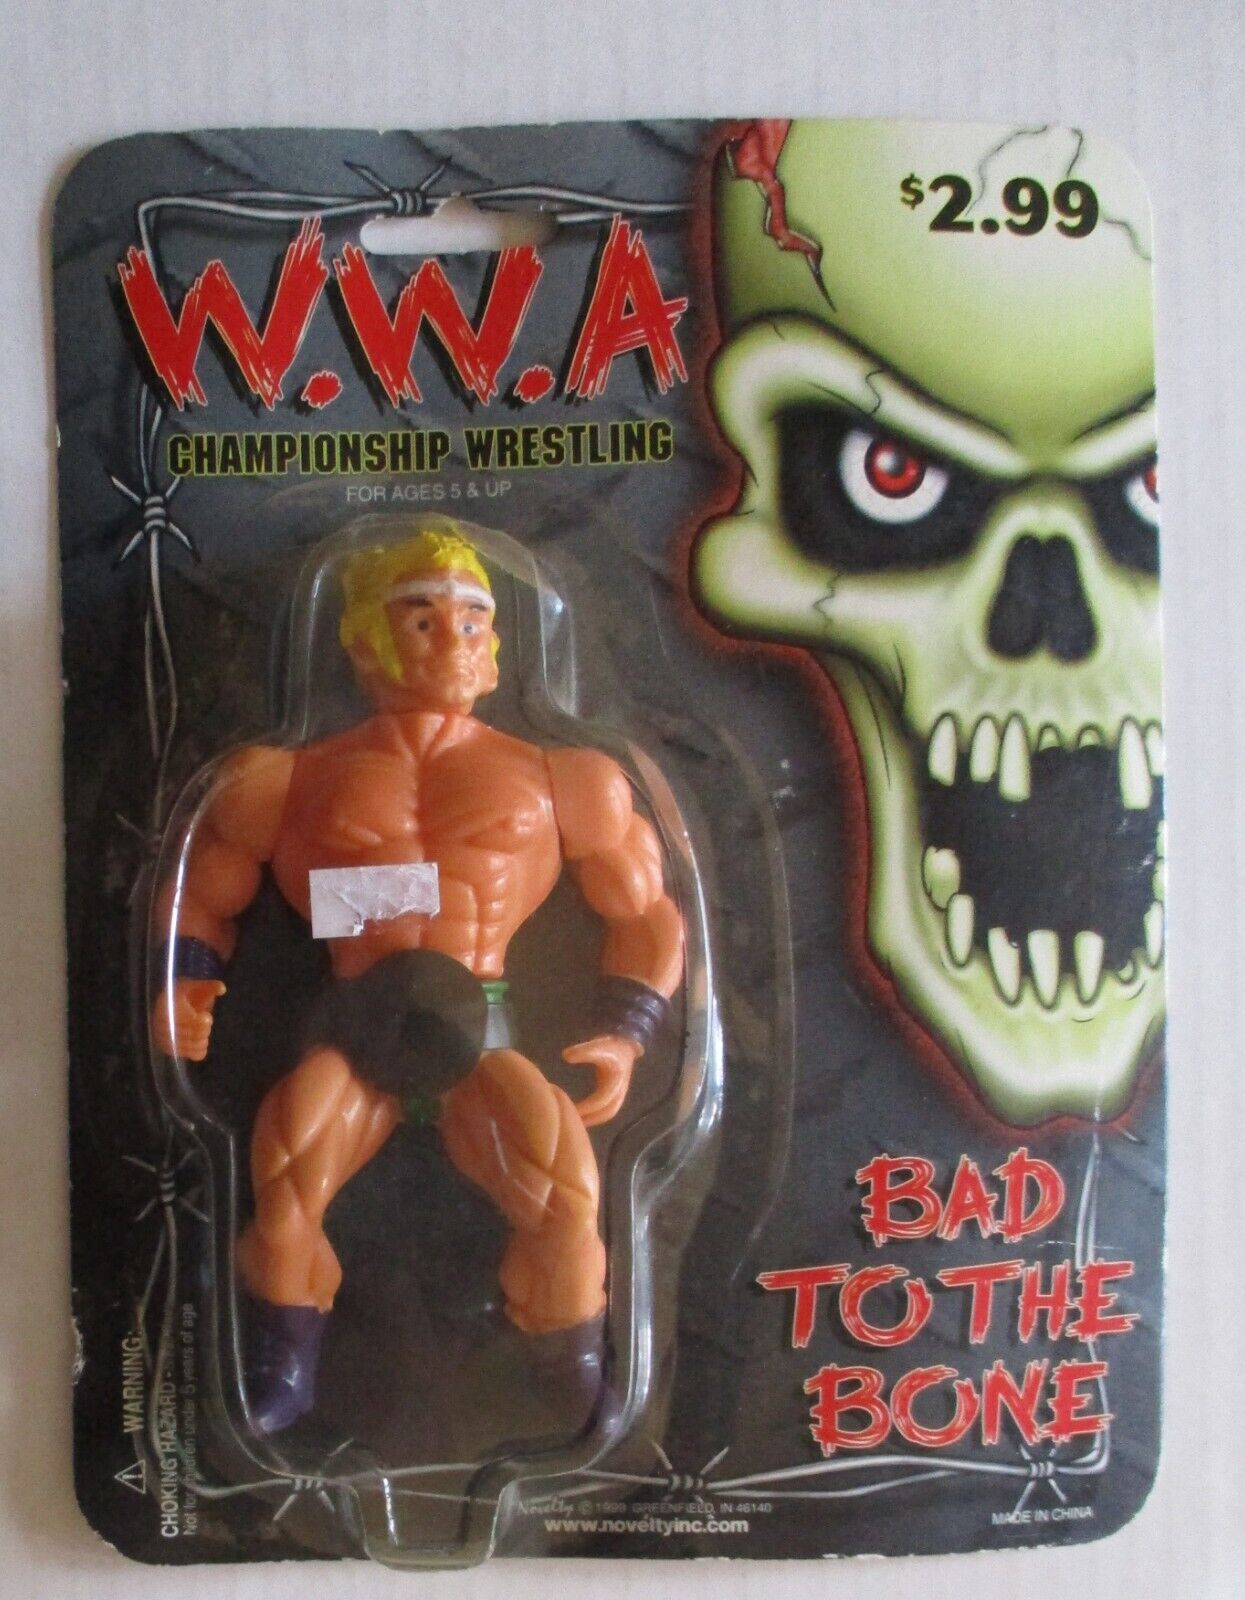 W.W.A. Championship Wrestling Bootleg/Knockoff Figures